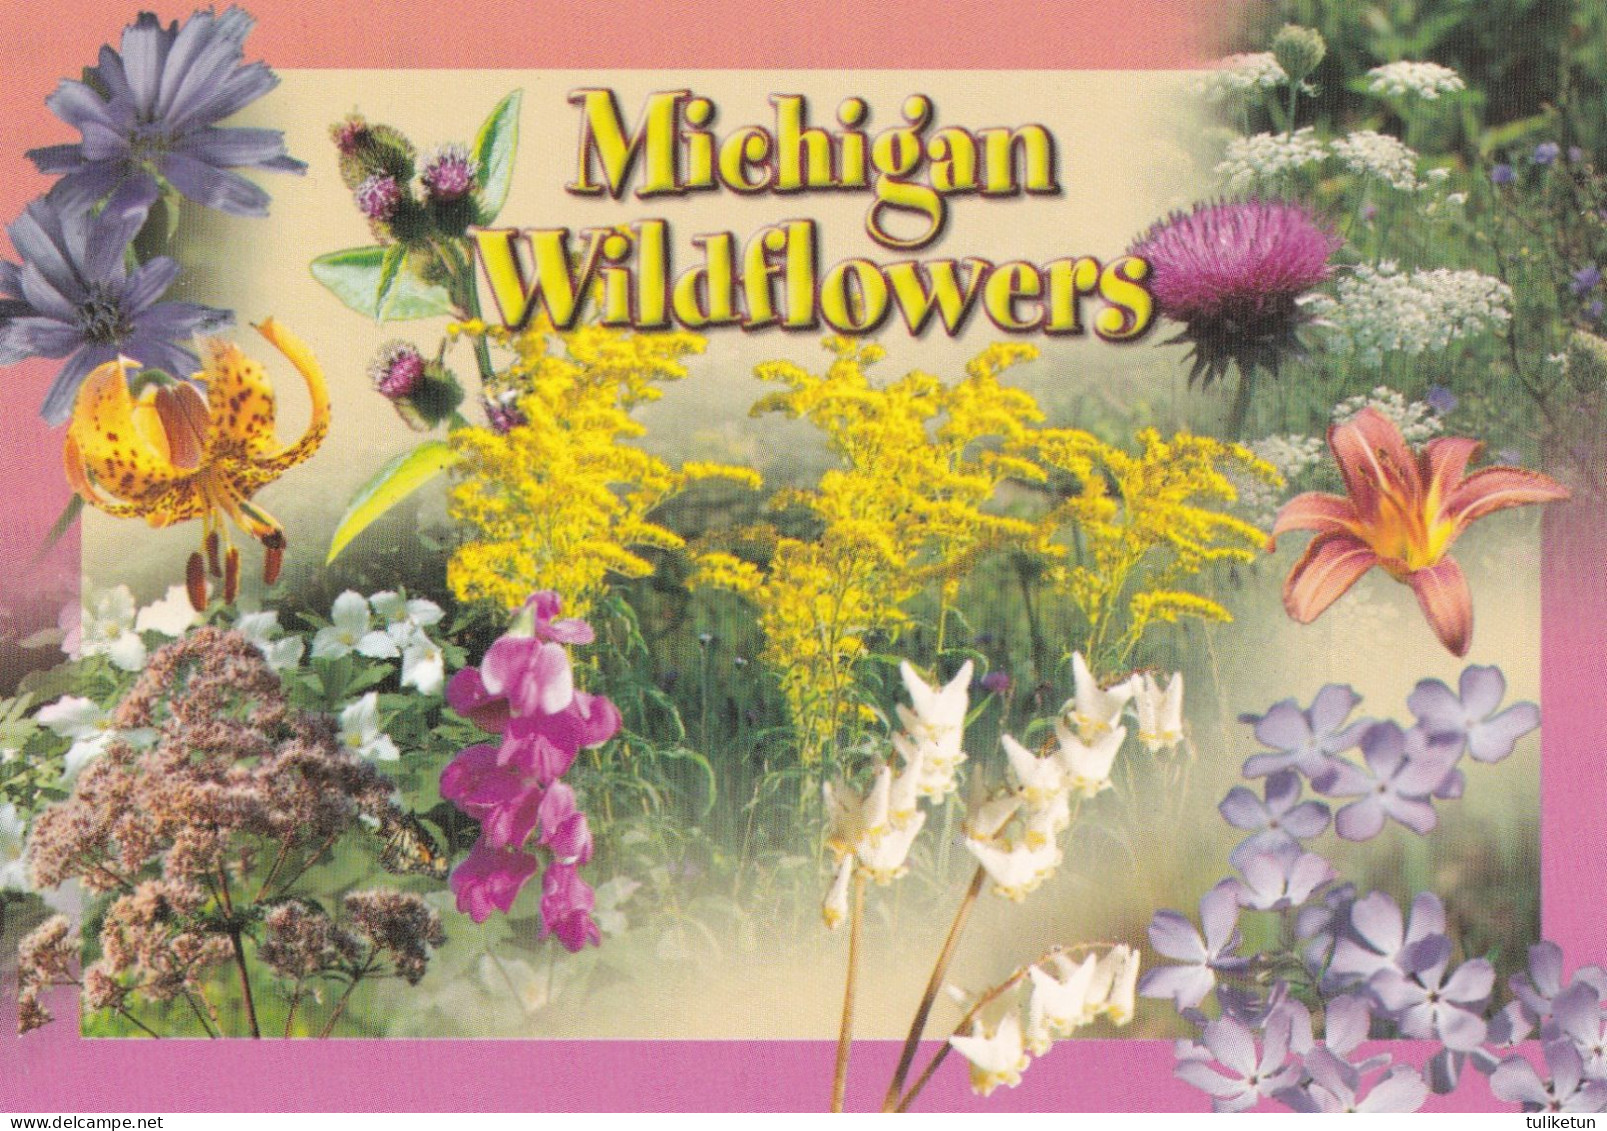 Michigan Wildflowers - Insectos